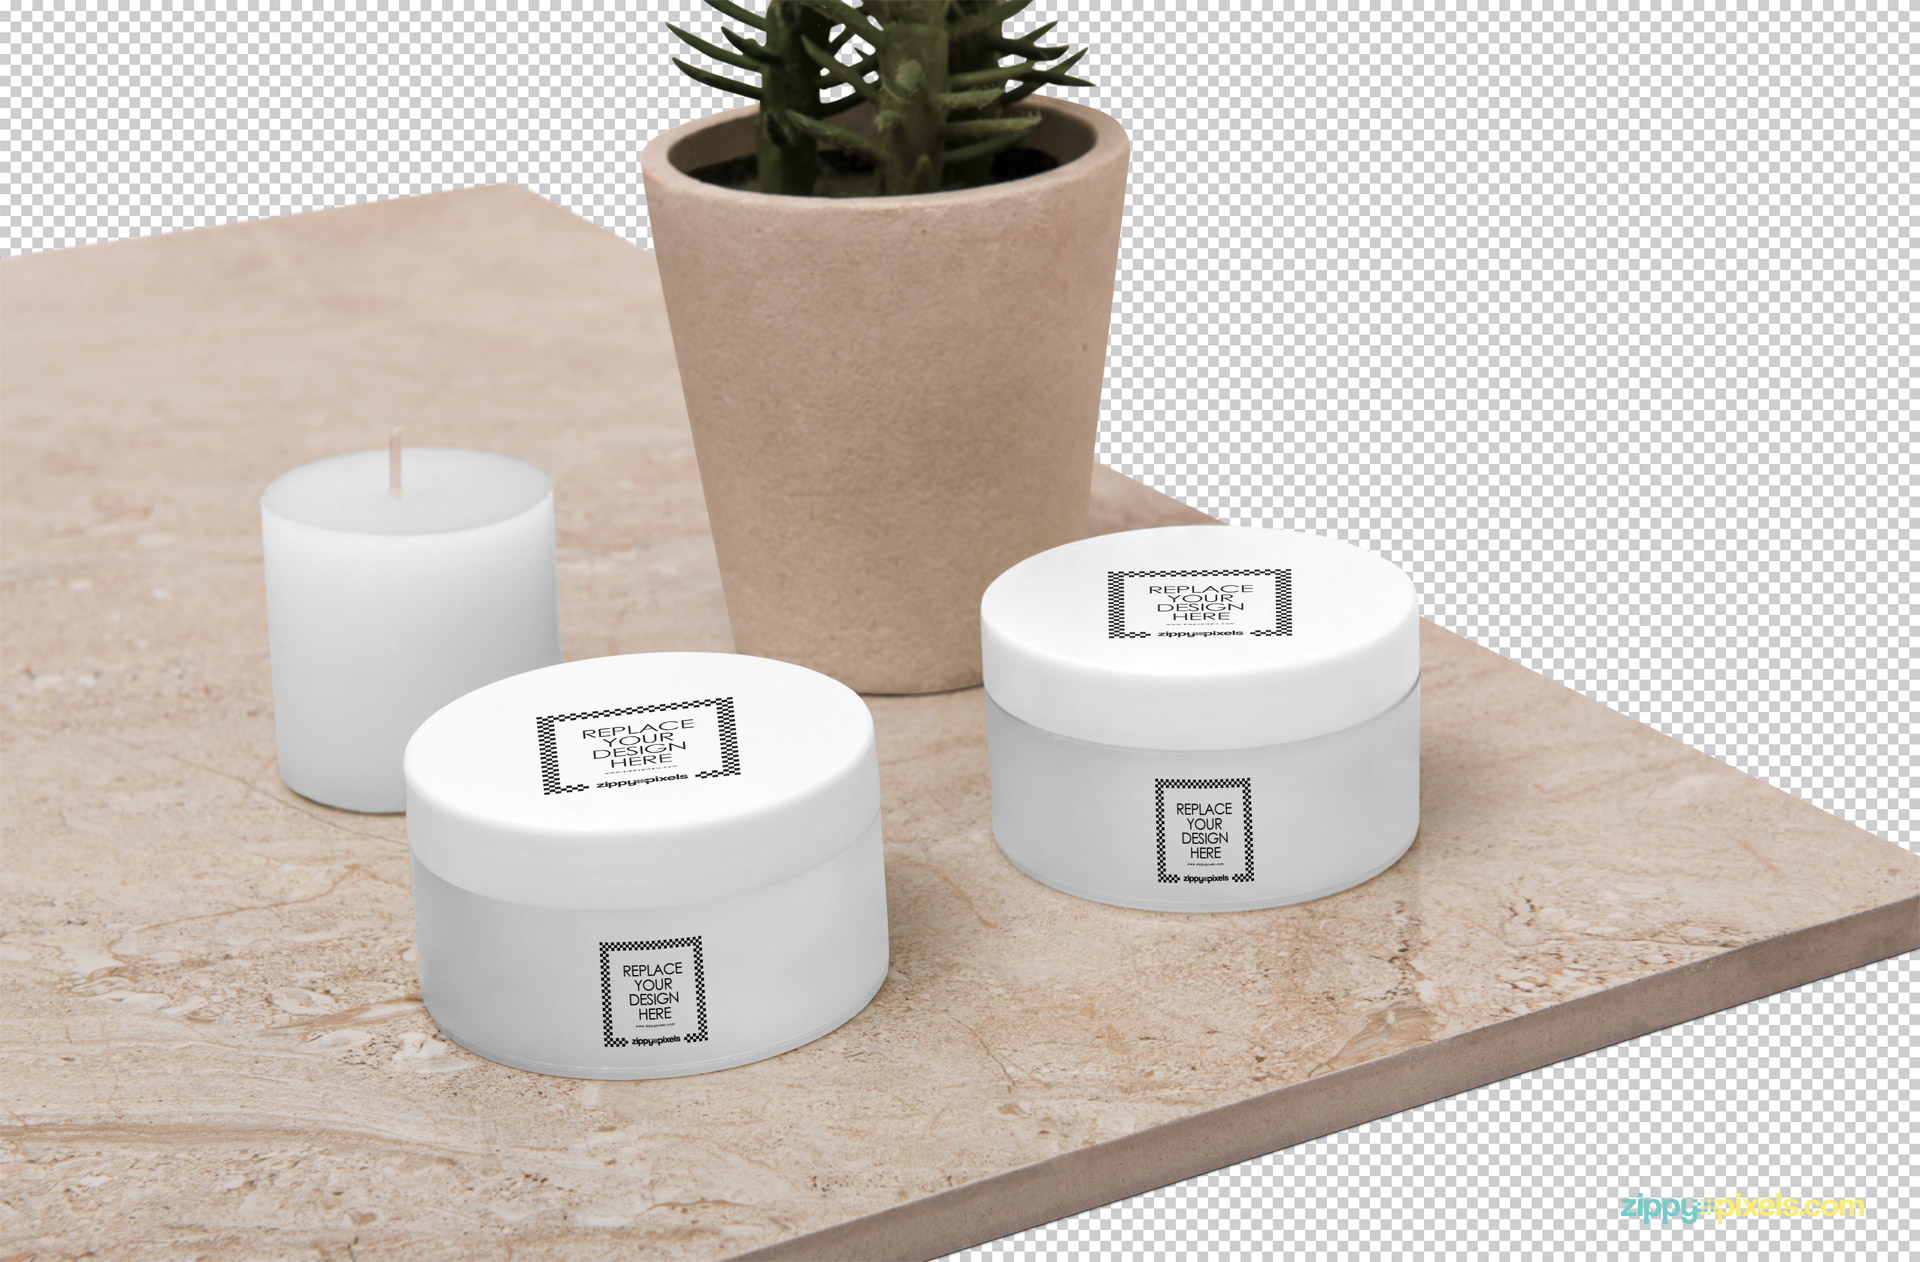 Use a smart object option to add your designs to this cosmetic jar mockup.